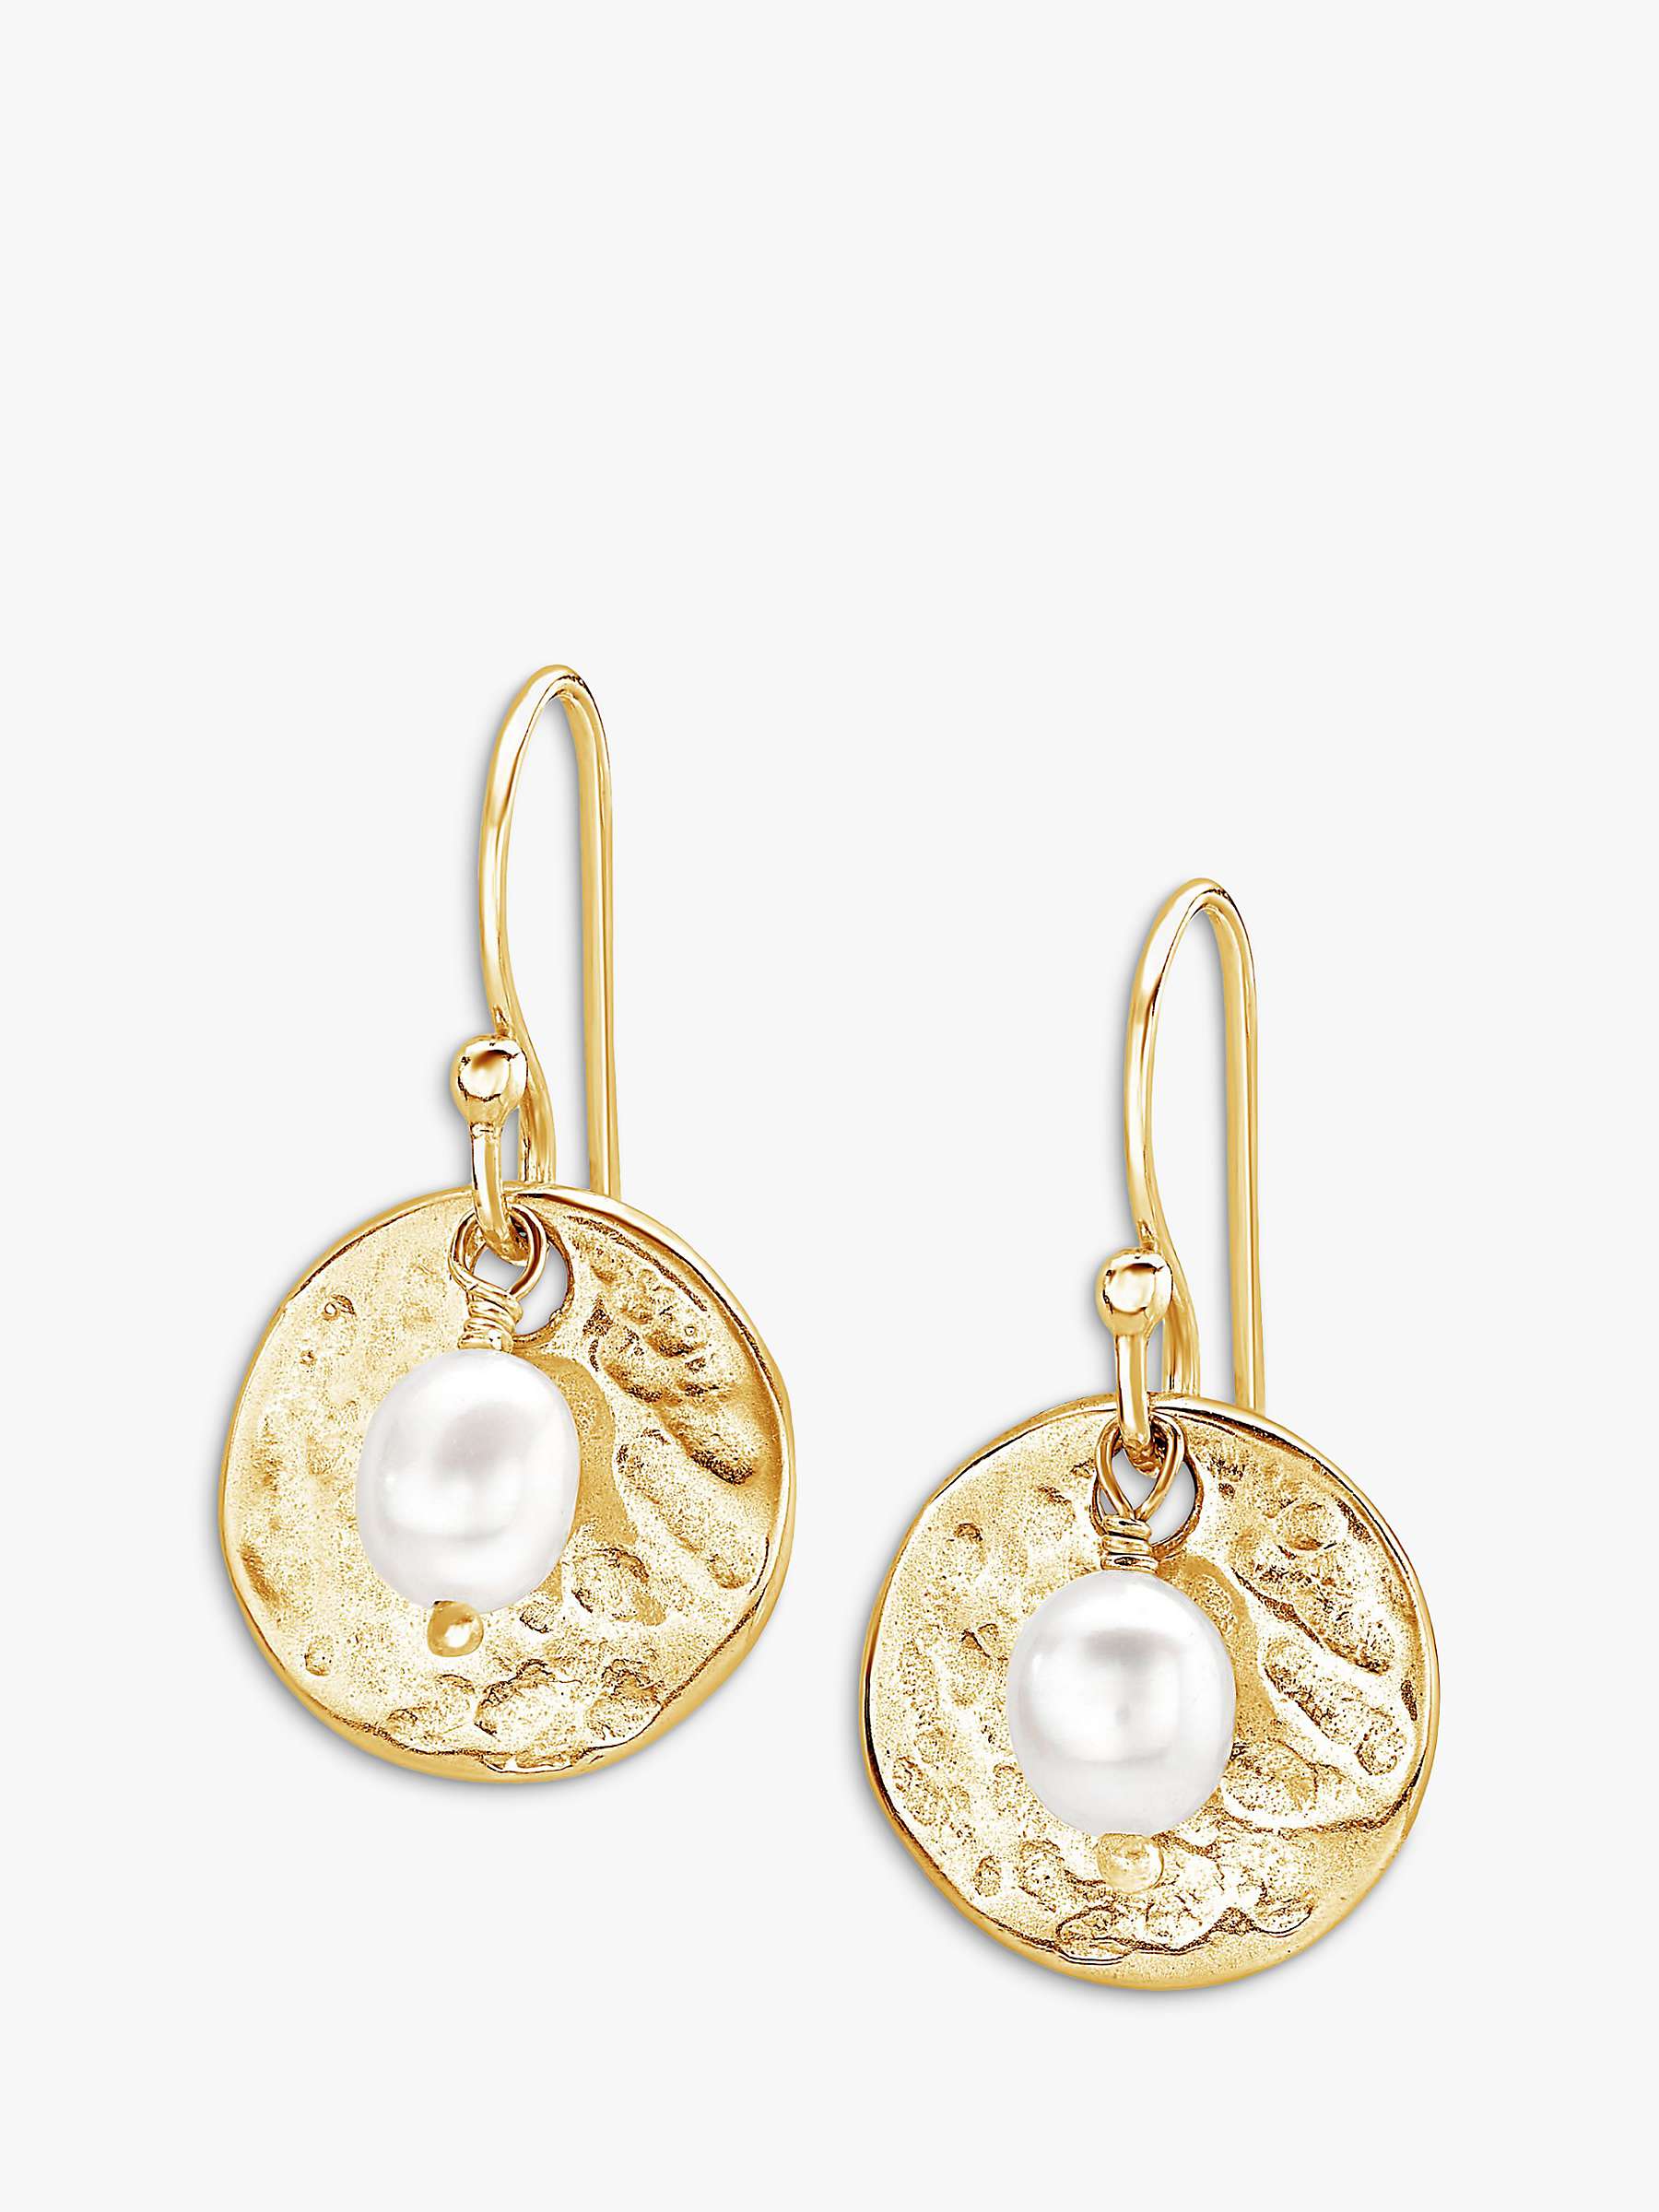 Buy Dower & Hall Sterling Silver Pearlicious Round Drop Earrings Online at johnlewis.com